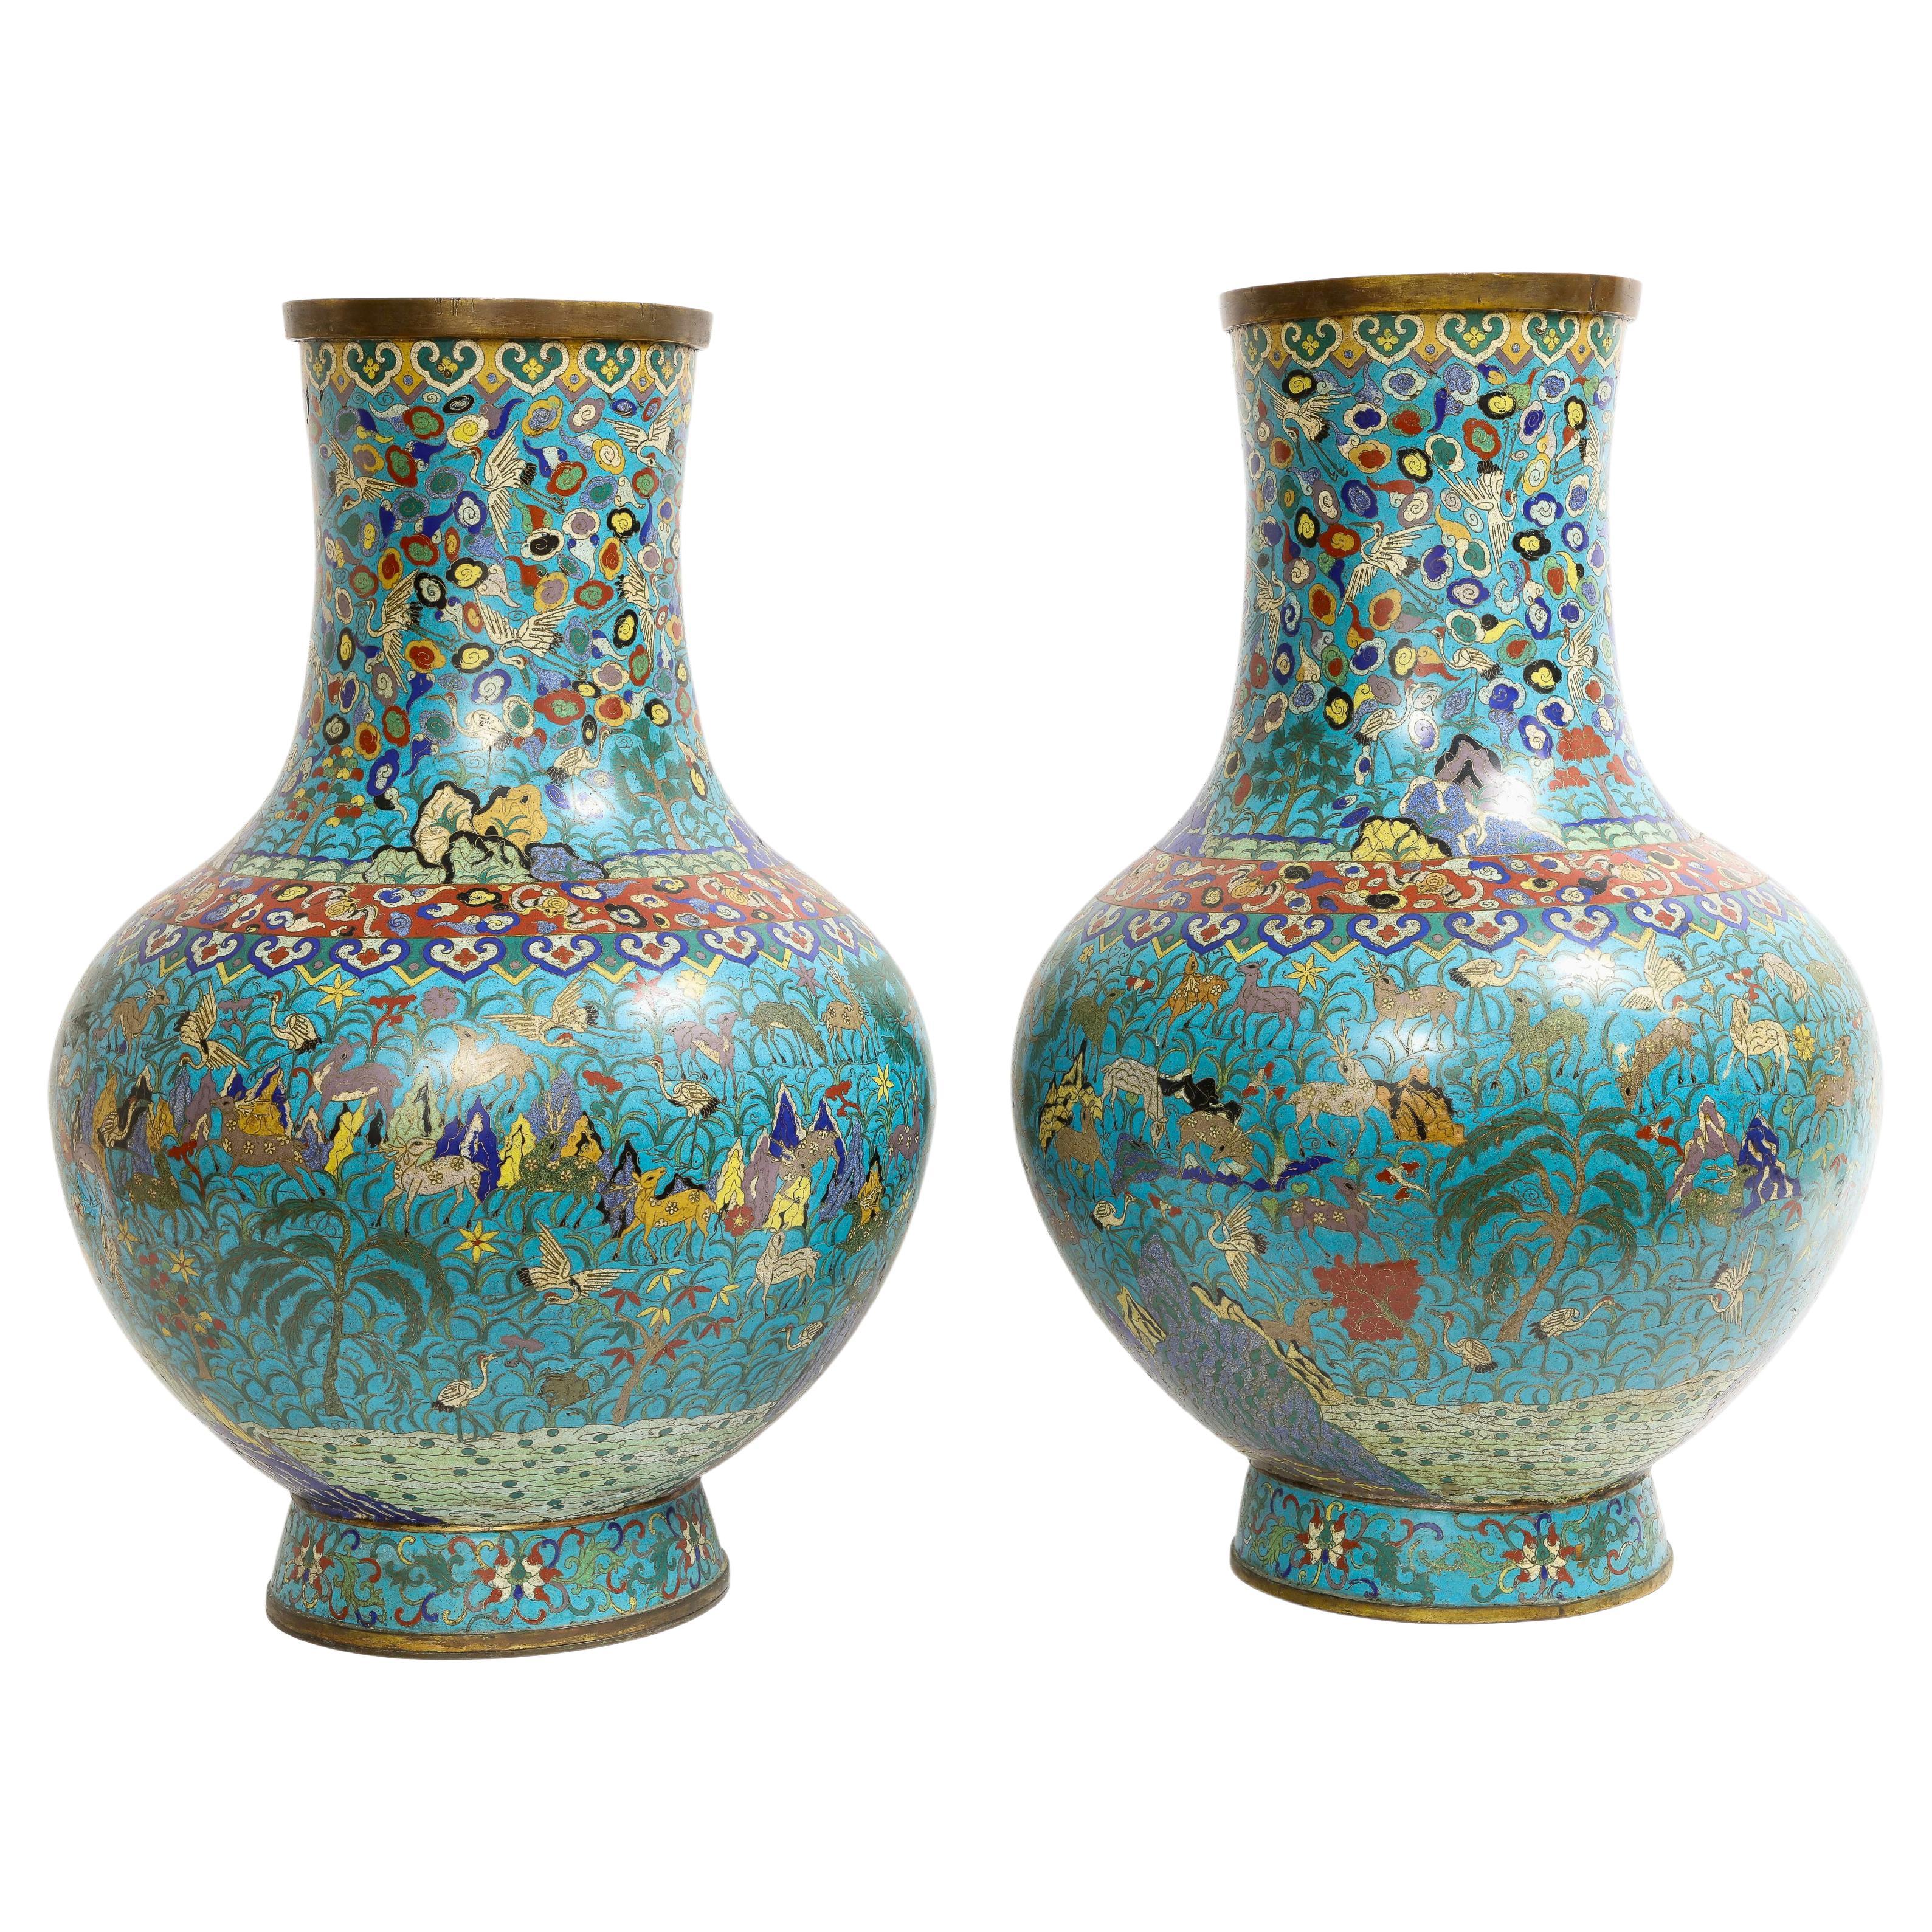 Massive Pair of 19th C. Chinese Cloisonne Enamel Vases with Deer Decoration For Sale